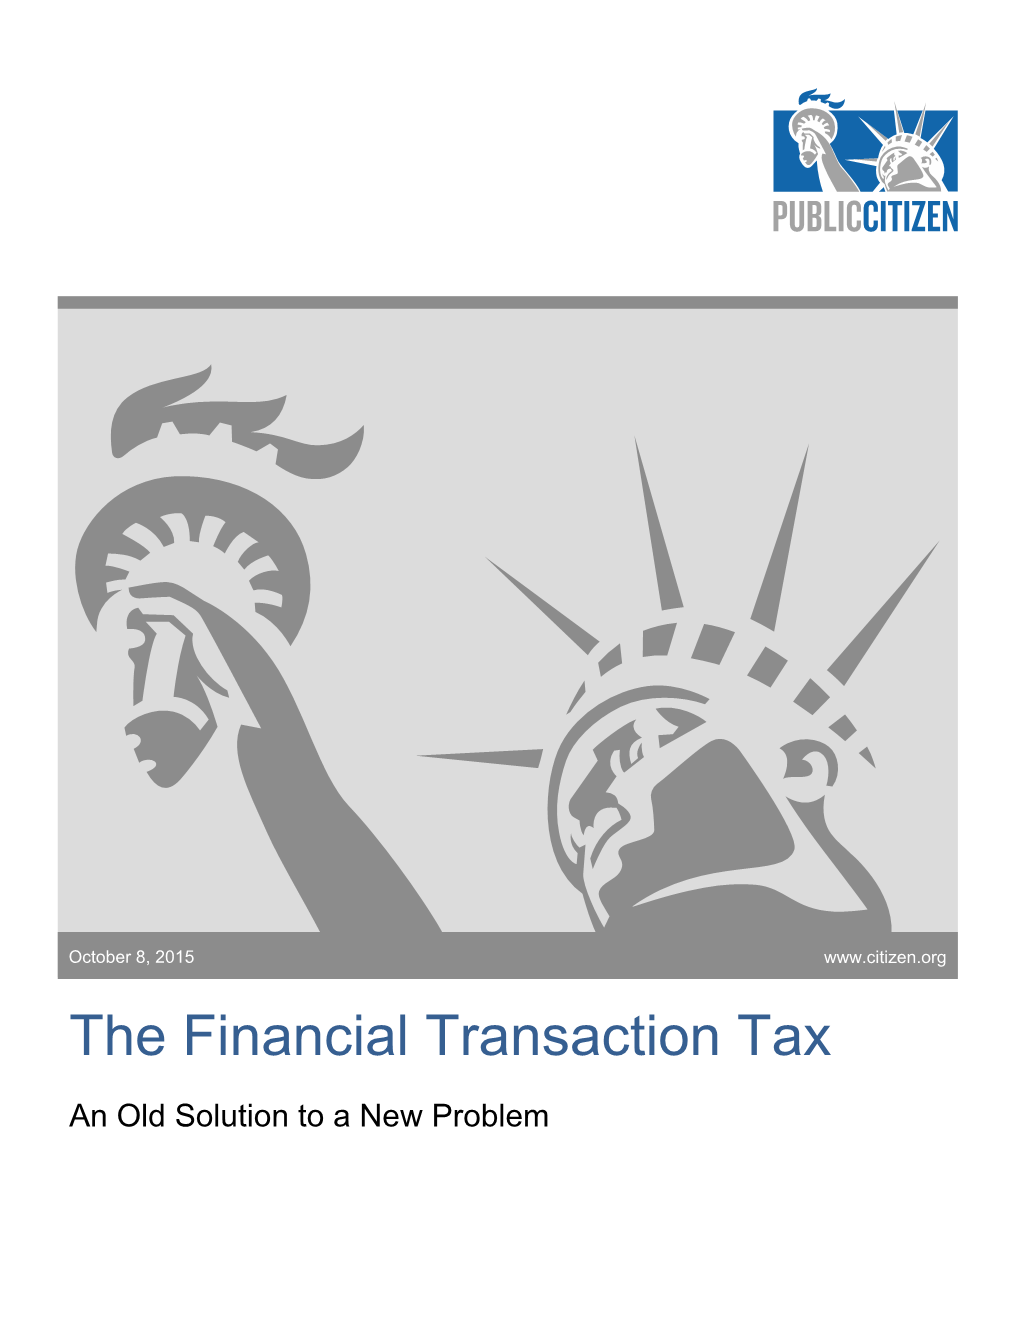 The Financial Transaction Tax an Old Solution to a New Problem